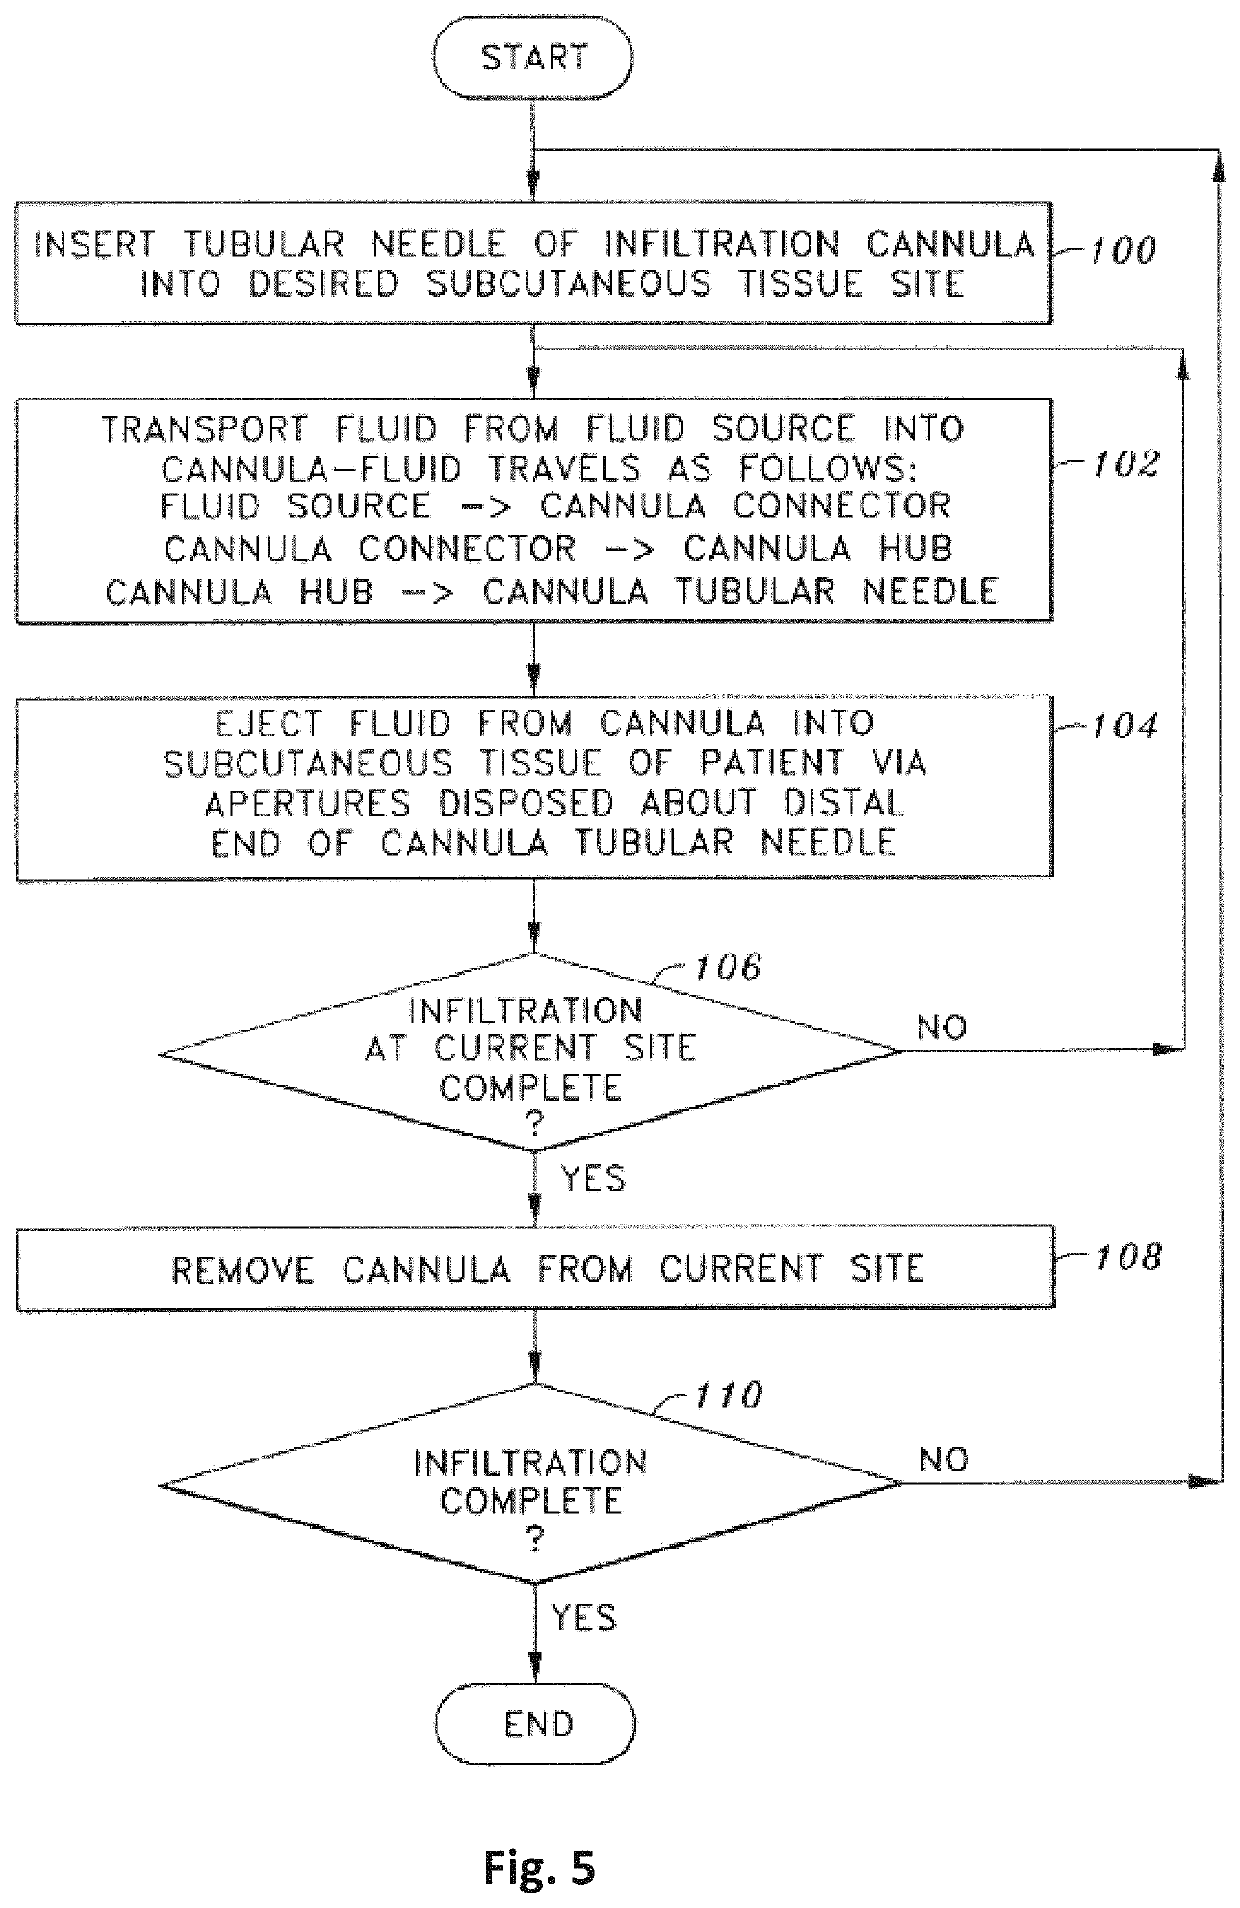 Tumescent infiltration drug delivery of cannabinoids